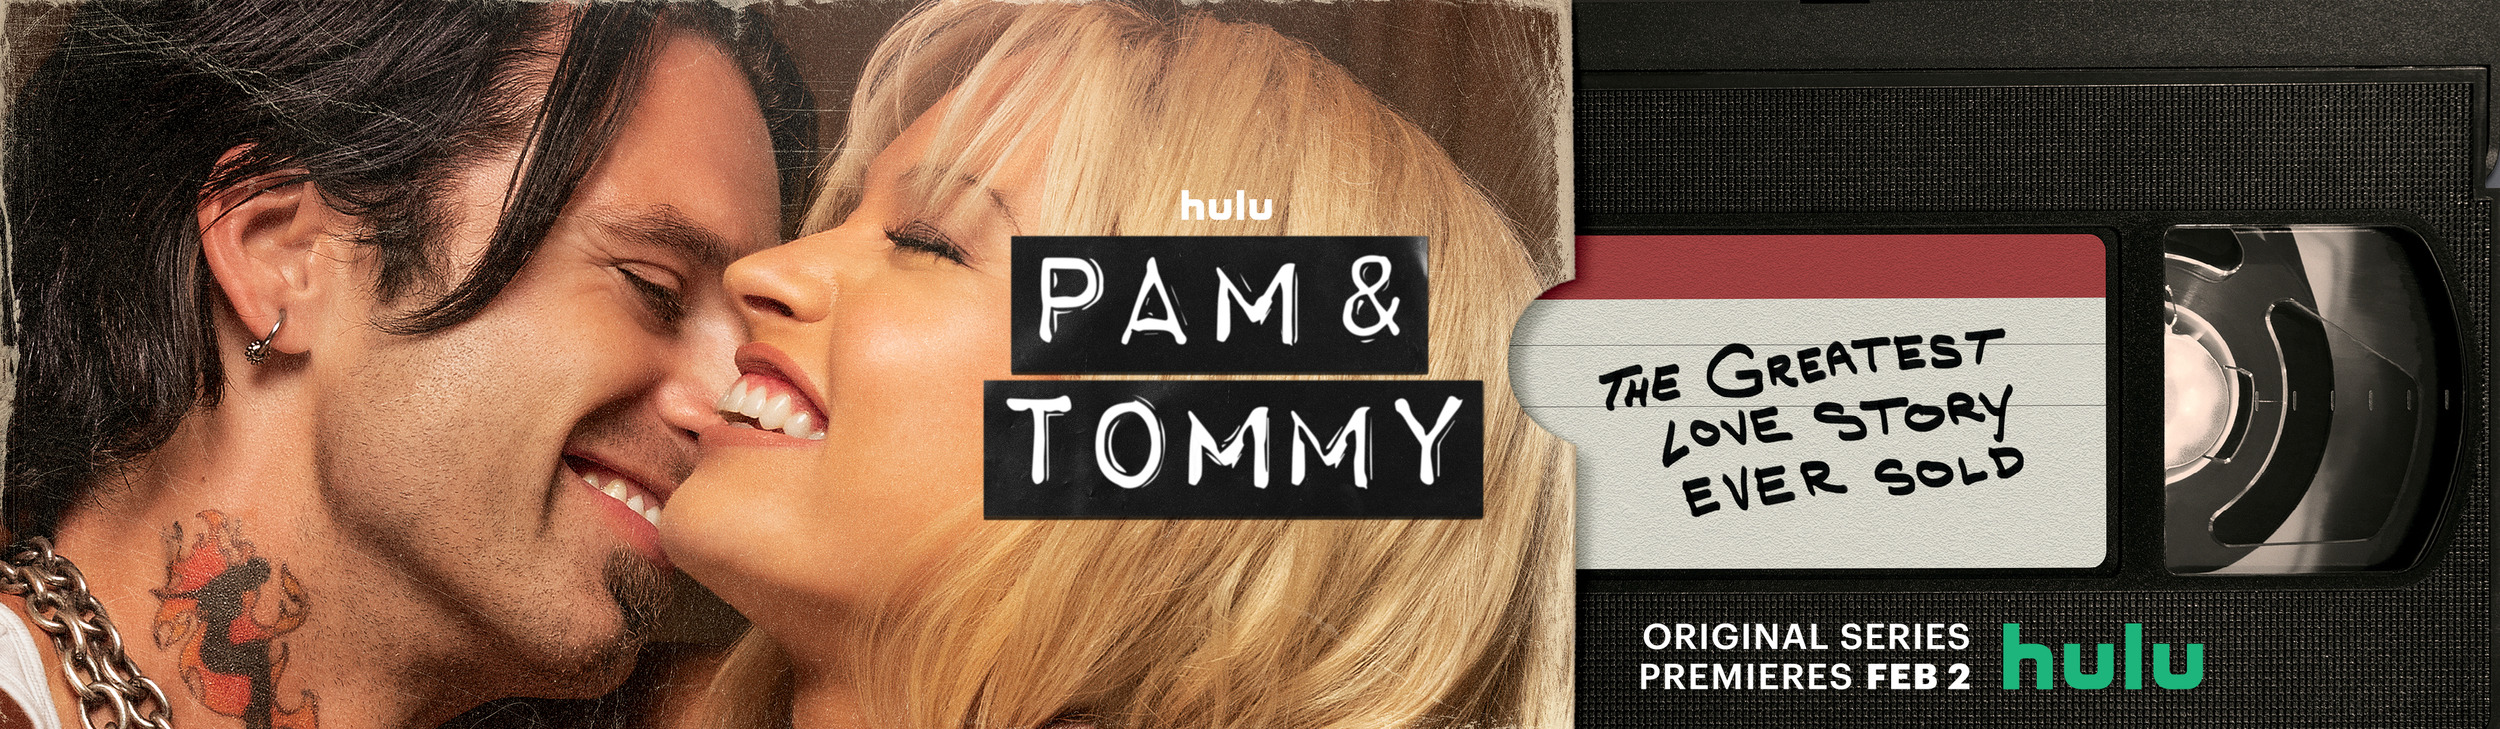 Mega Sized TV Poster Image for Pam & Tommy (#8 of 8)